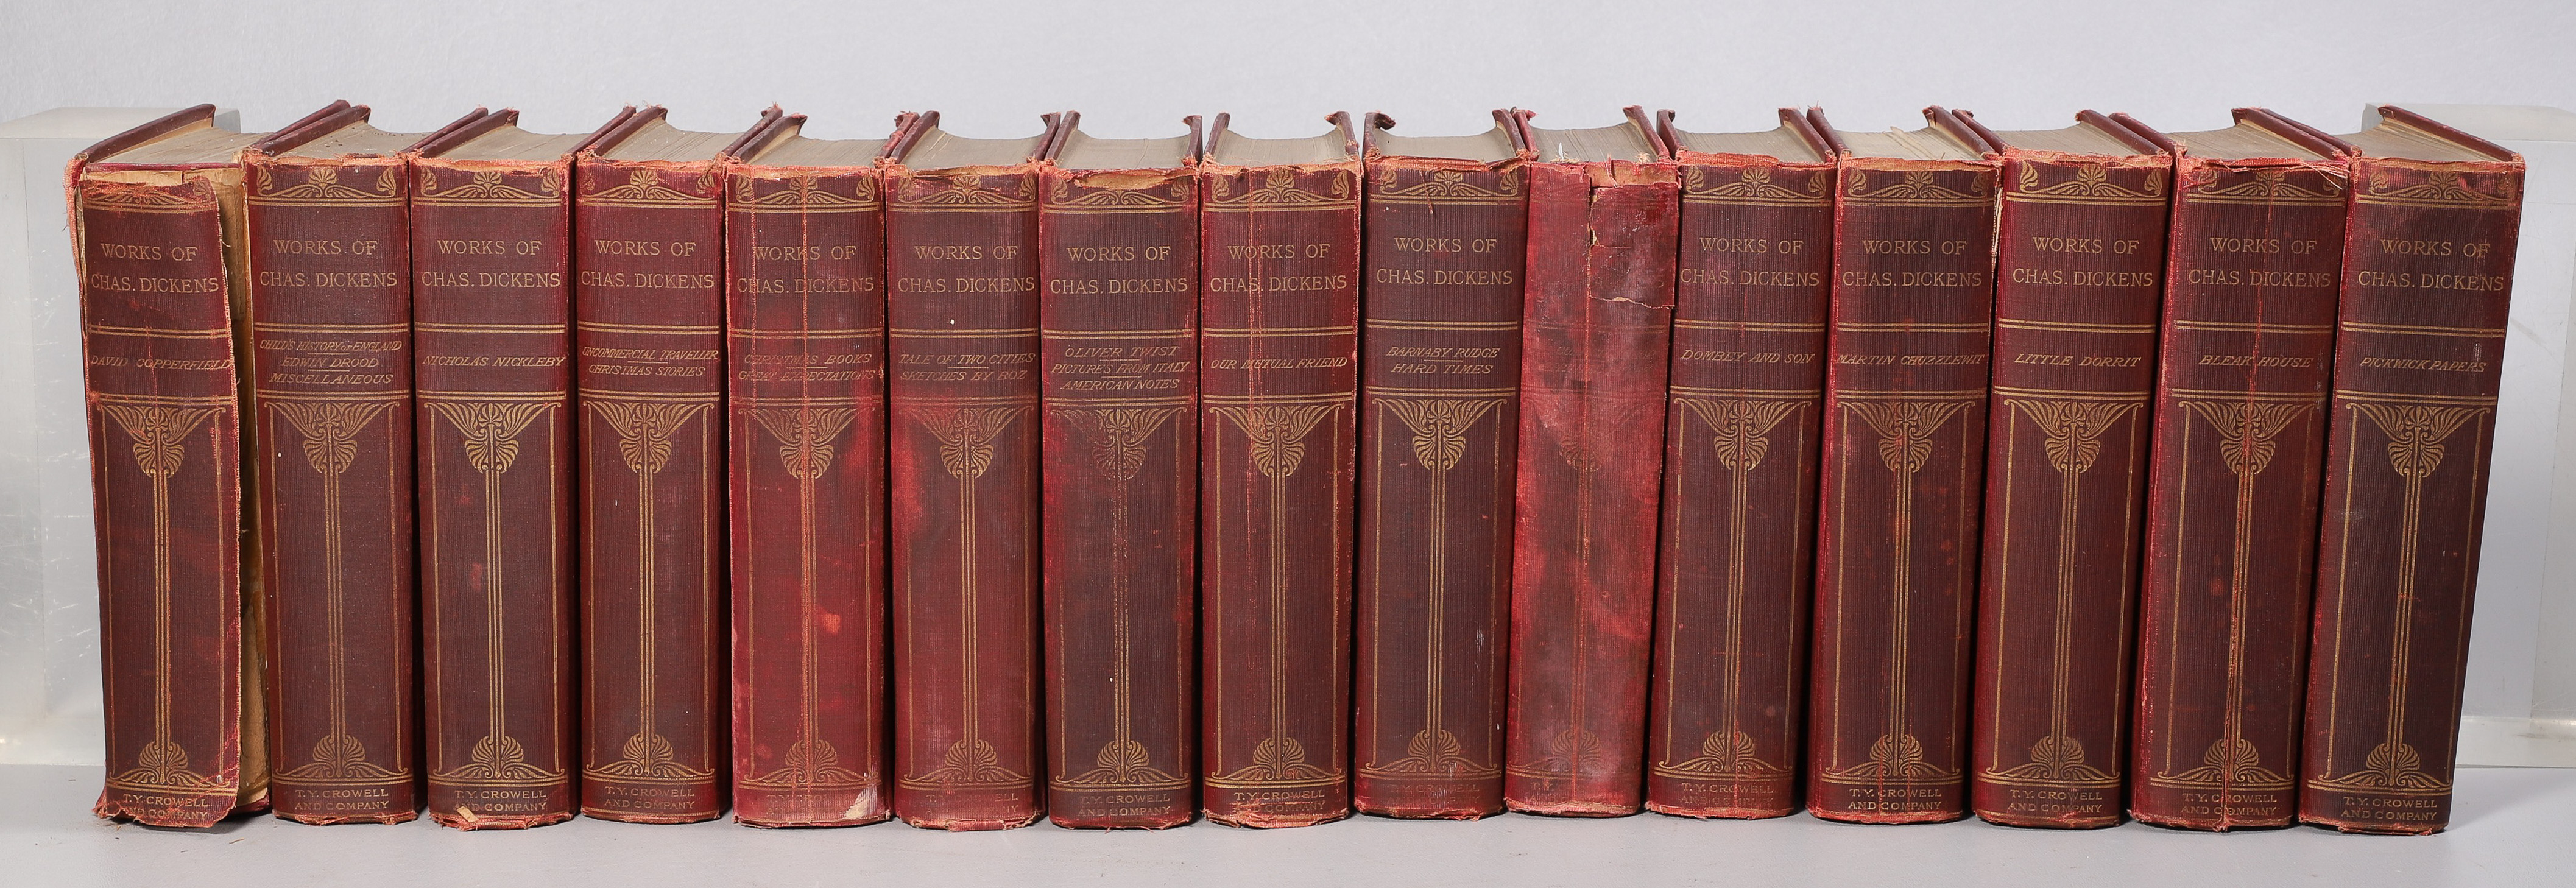 Fifteen volumes of the Works of 2e19b8